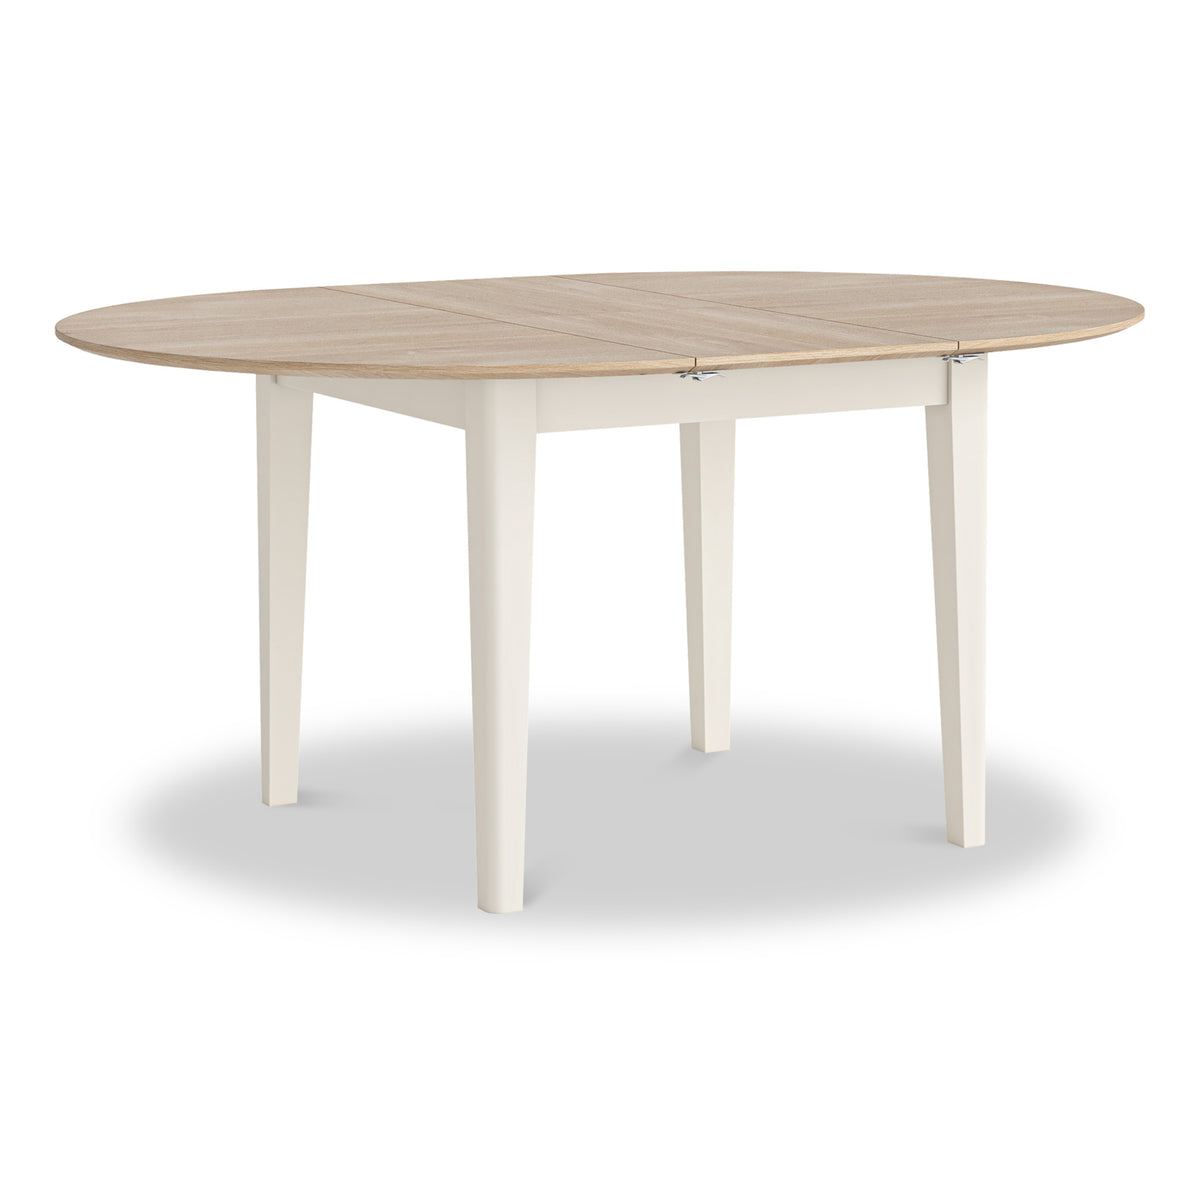 Penrose Coconut White  Extending Round Dining Table from Roseland Furniture